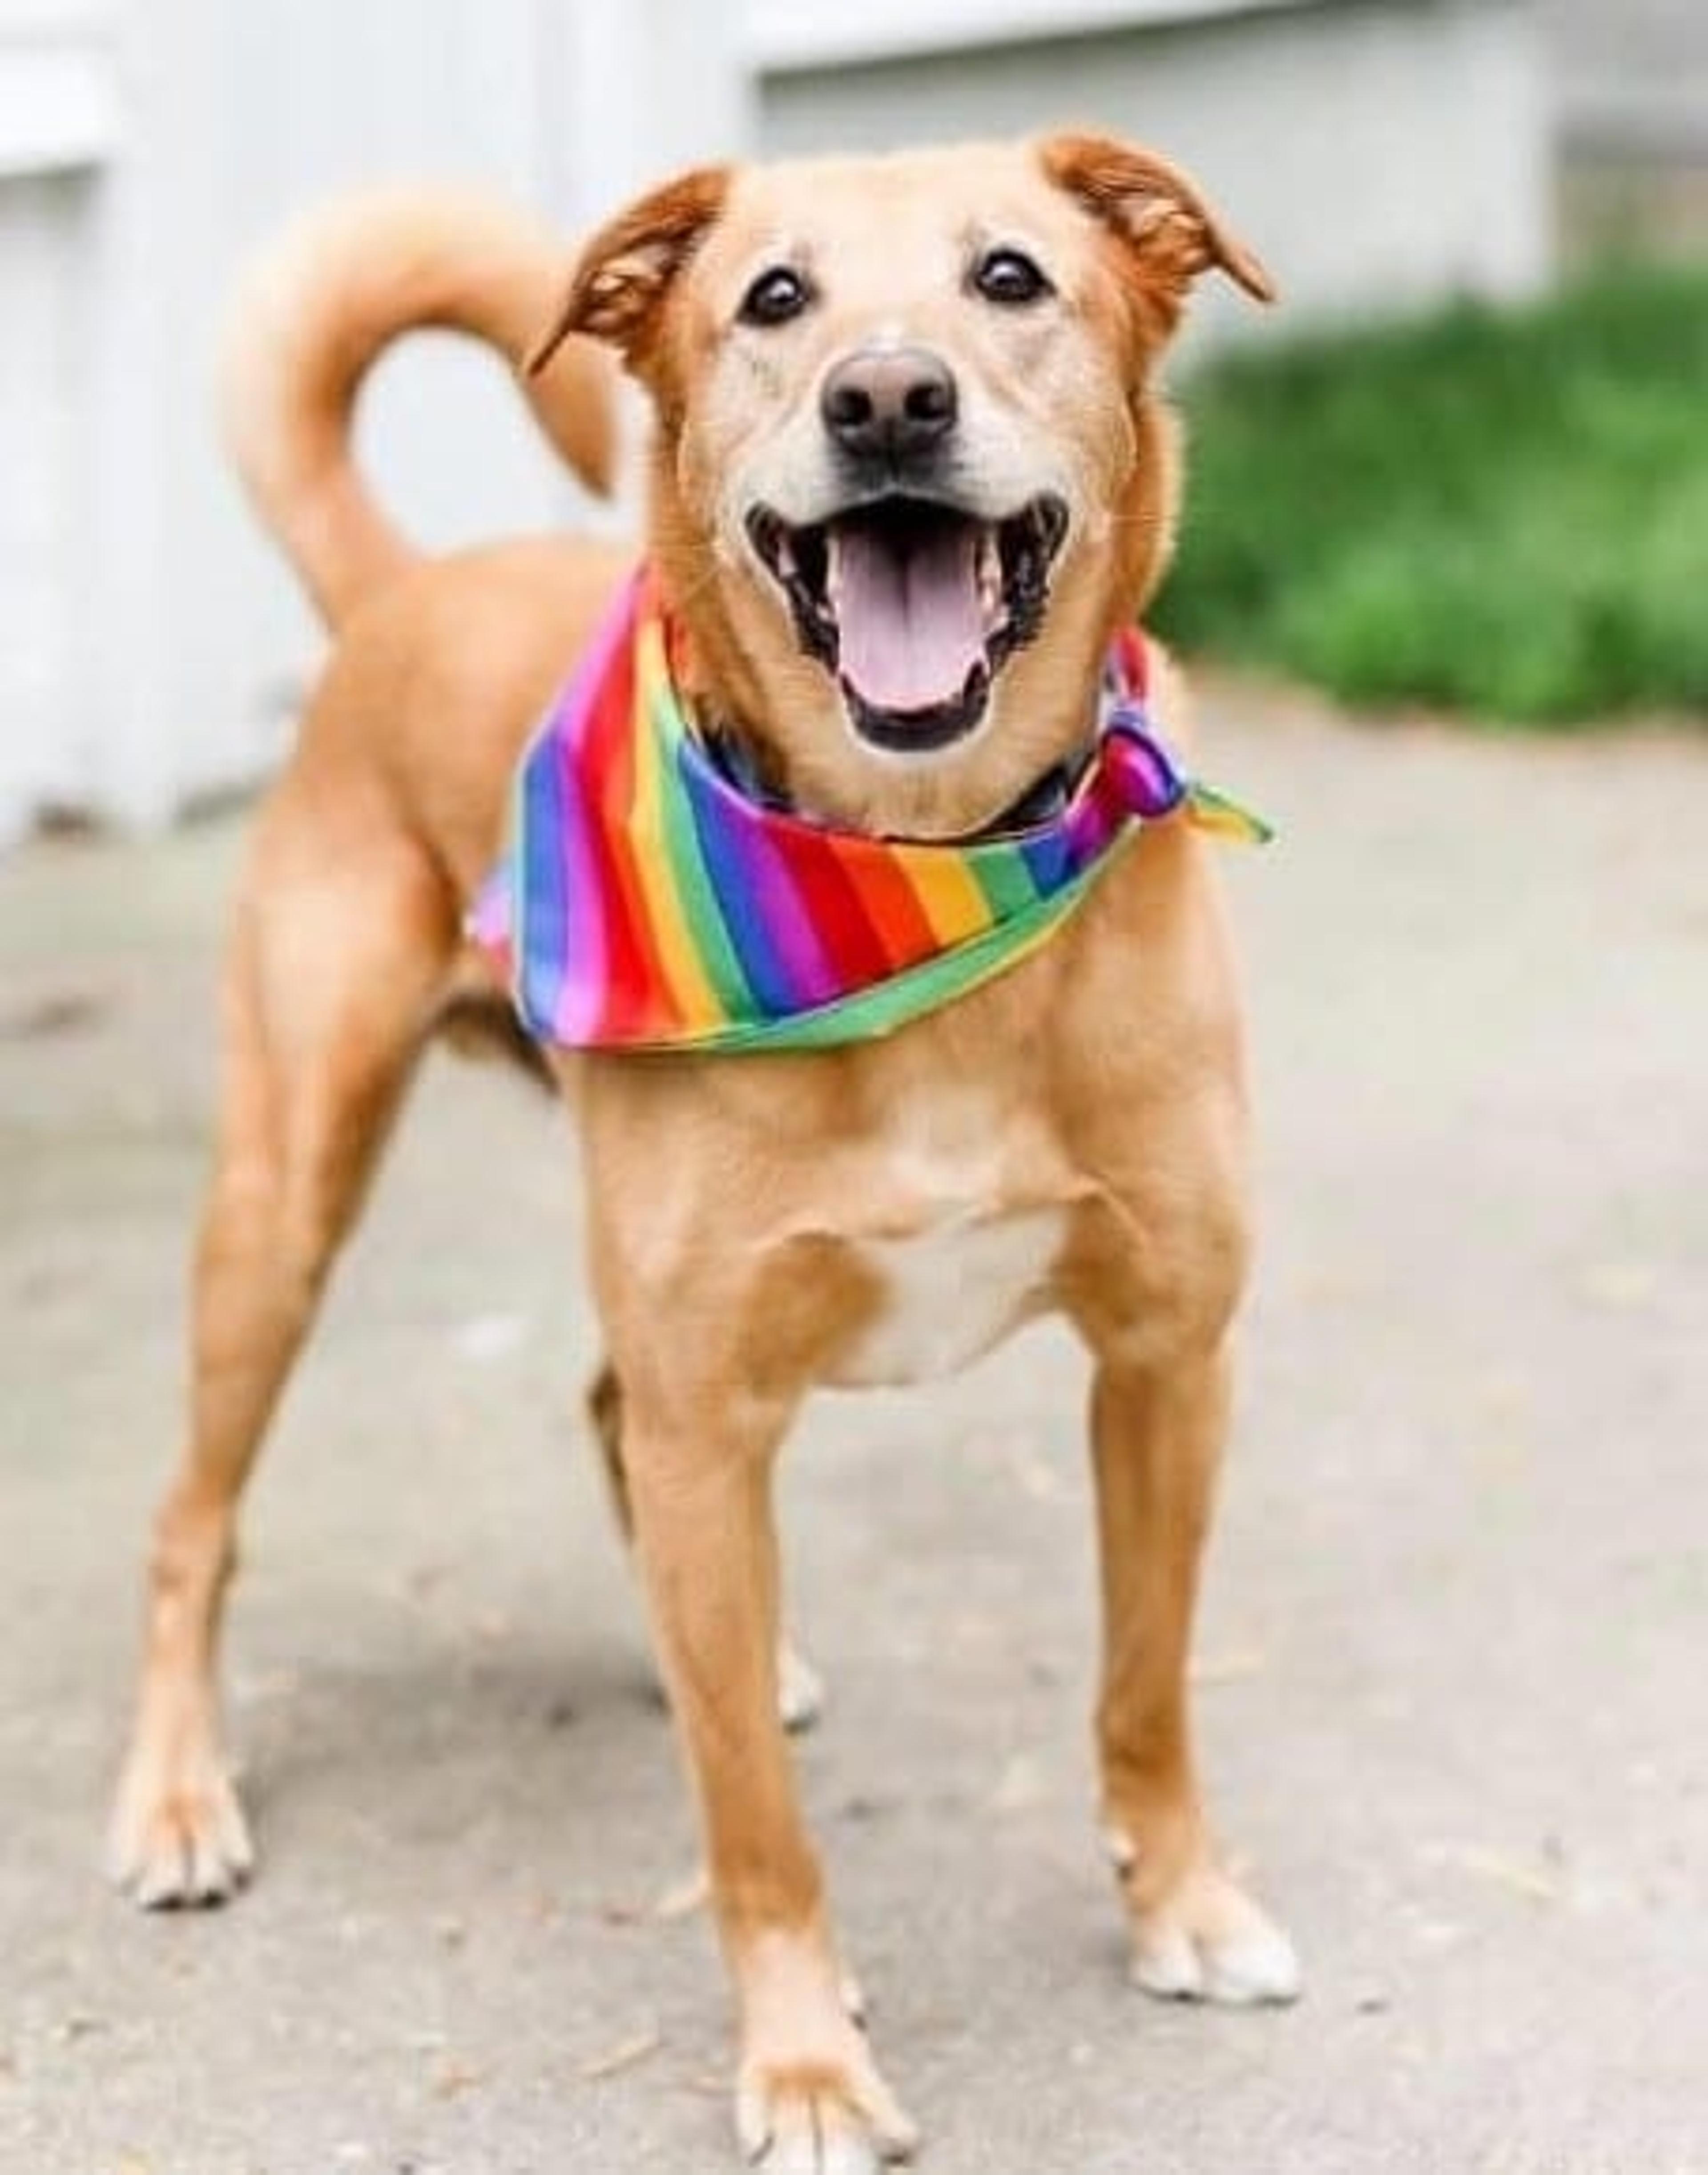 Bryan Beaver’s dog, Charlie, dressed up and ready for Ferndale Pride in 2018.